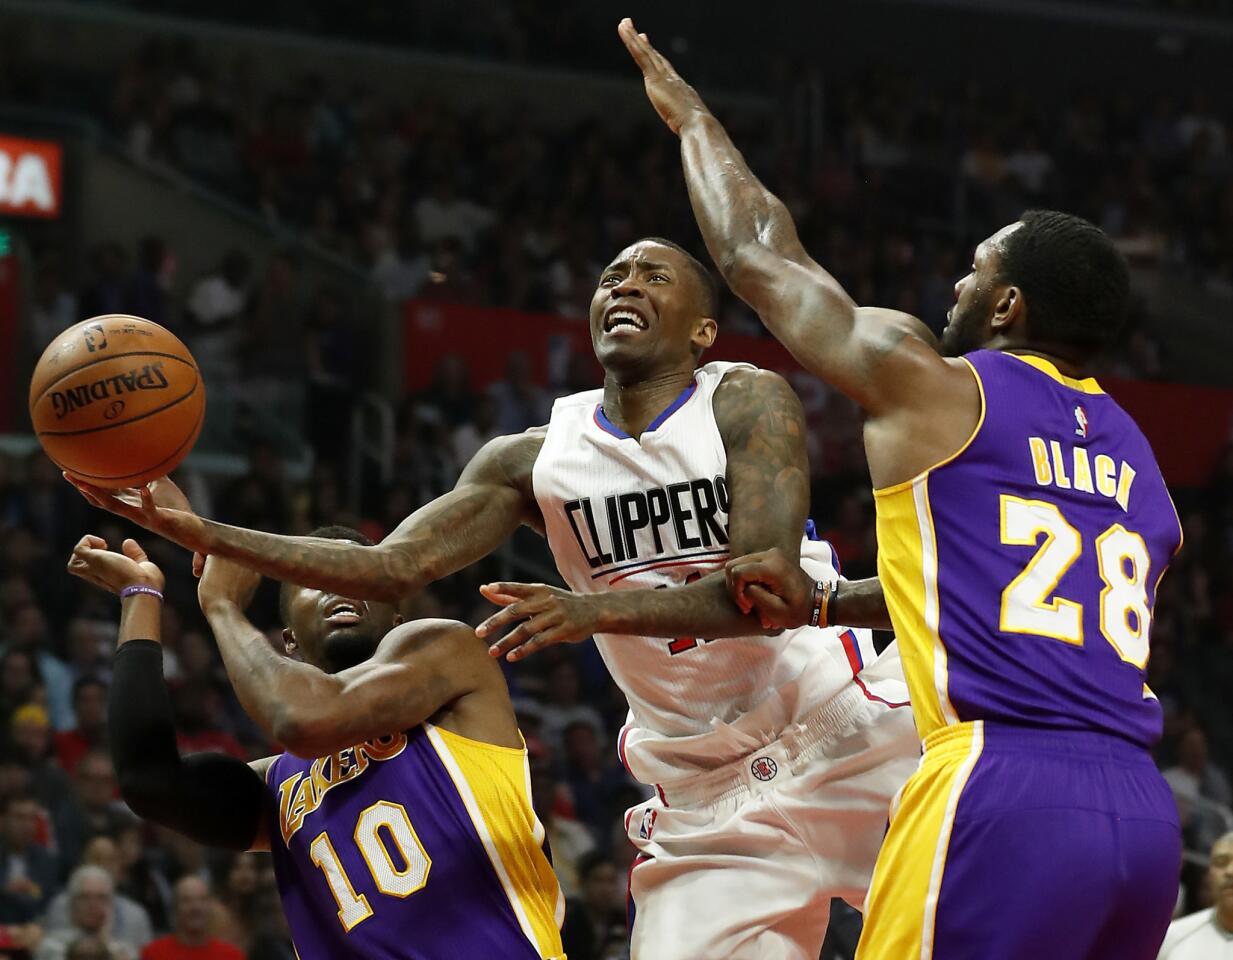 Clippers guard Jamal Crawford drives to the basket in between Lakers guard David Nwaba, left, and center Tarik Black, right, during the first half of a game on April 1 at Staples Center.